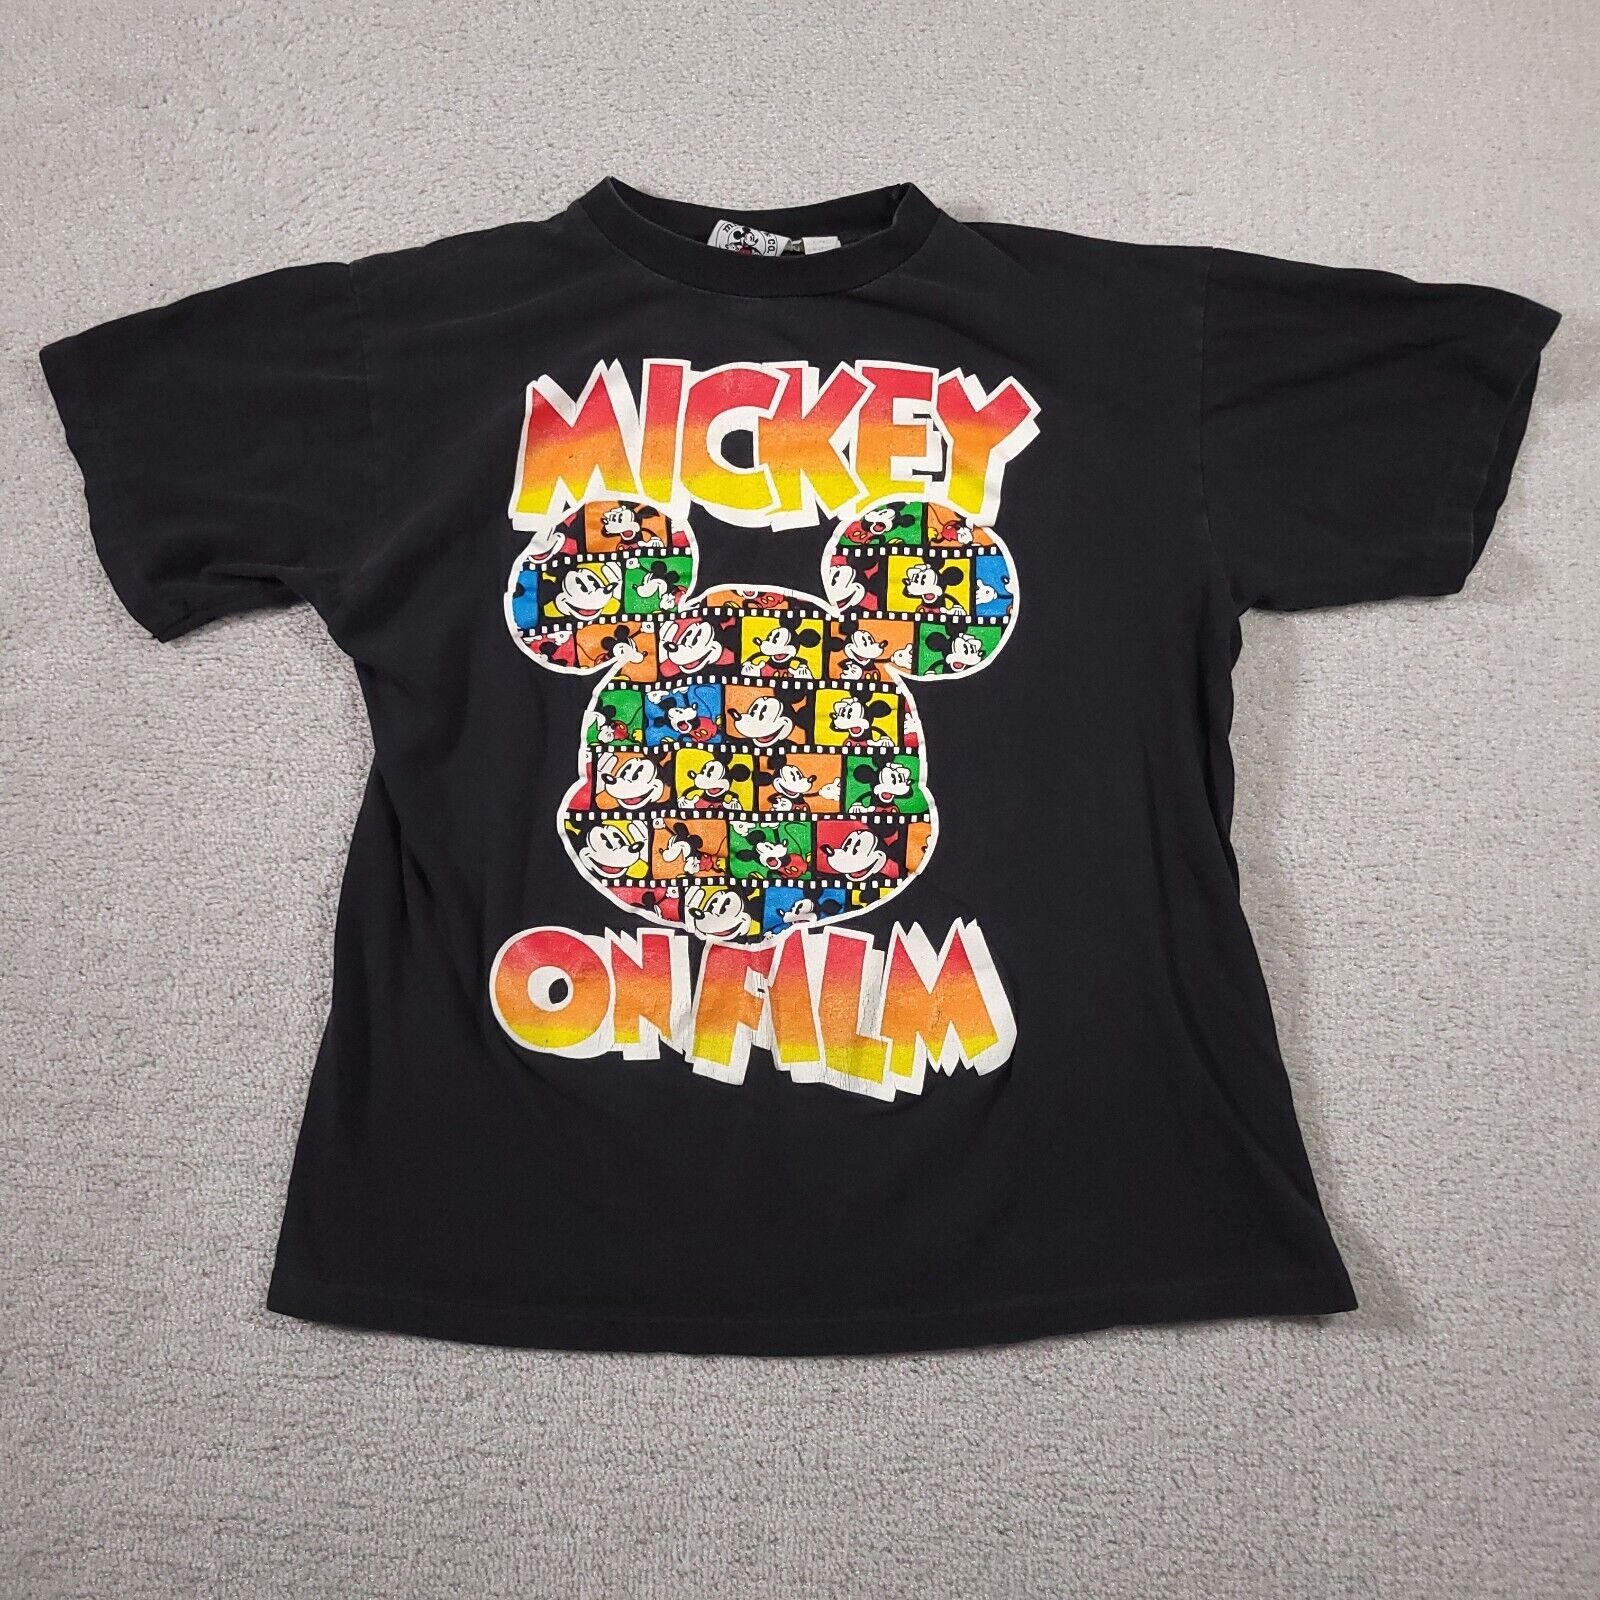 Vtg Original Mickey & Co. Mickey Mouse Mickey On Film T Shirt Adult One Size